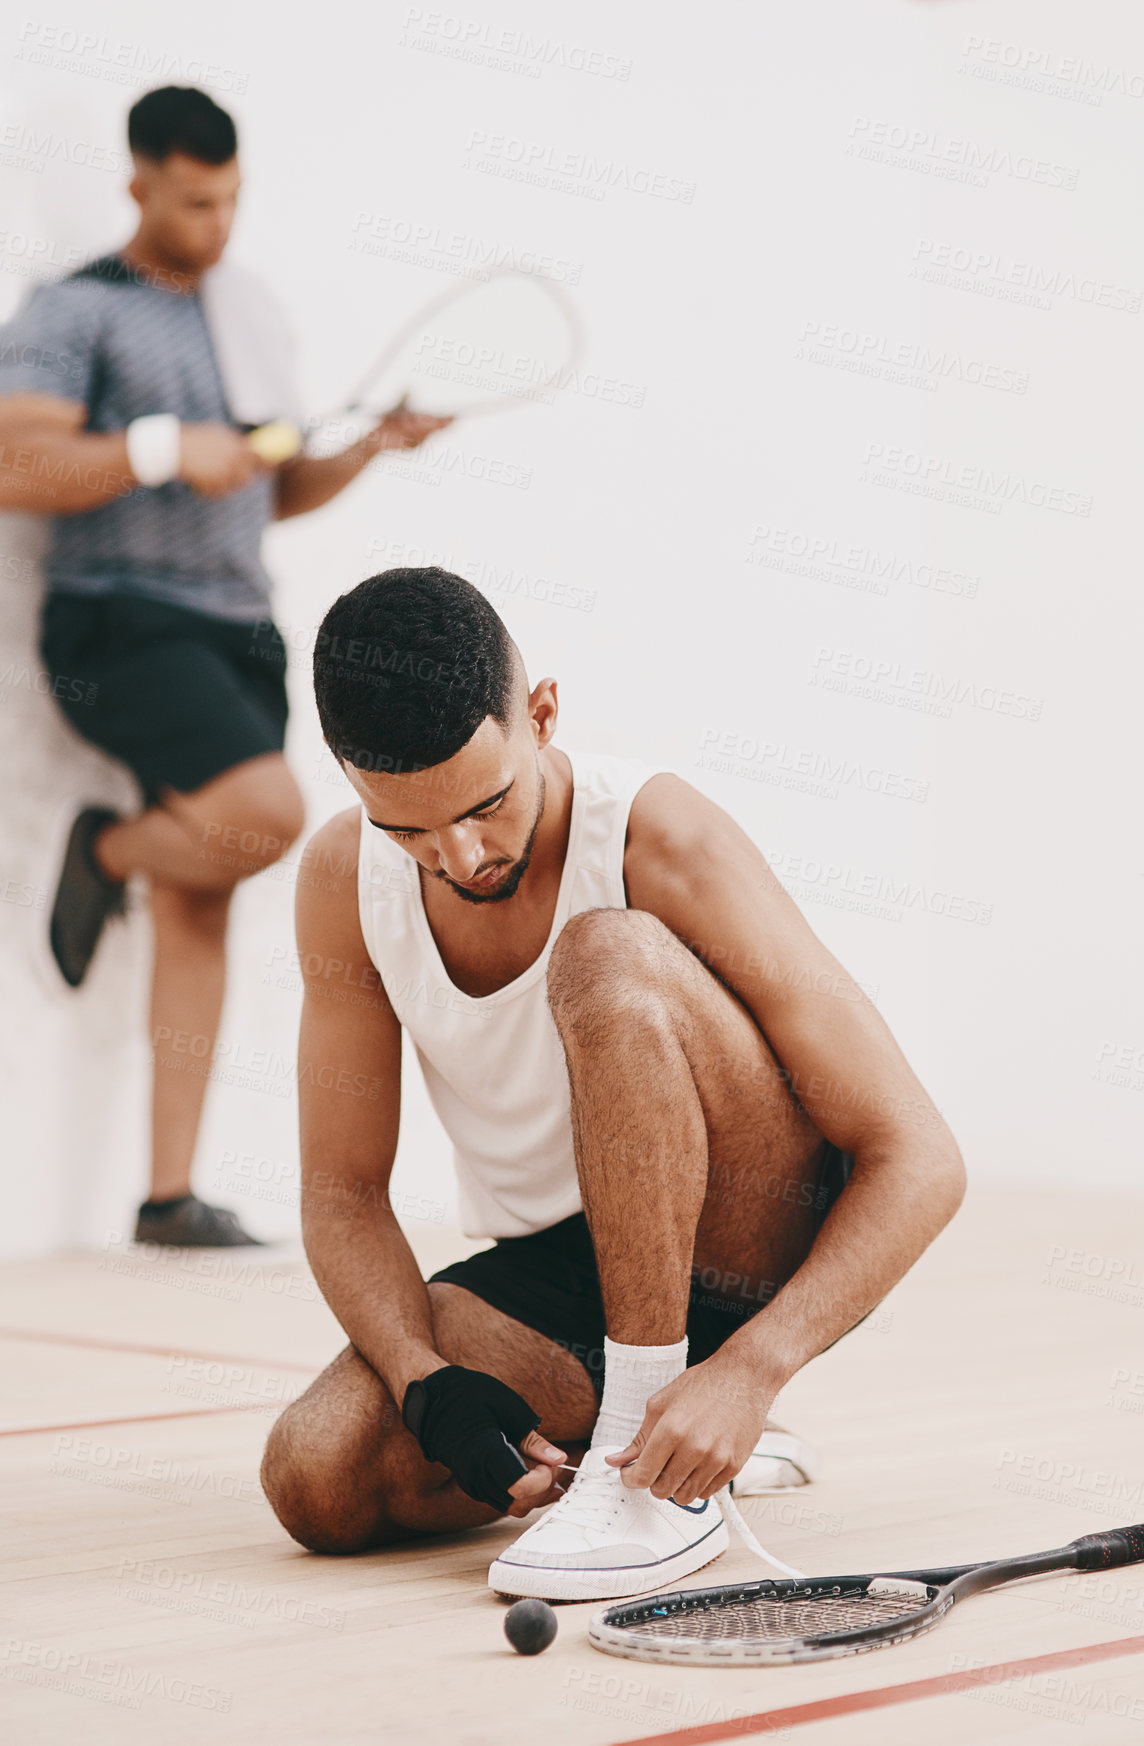 Buy stock photo Shot of a young man tying his shoelaces before a game of squash